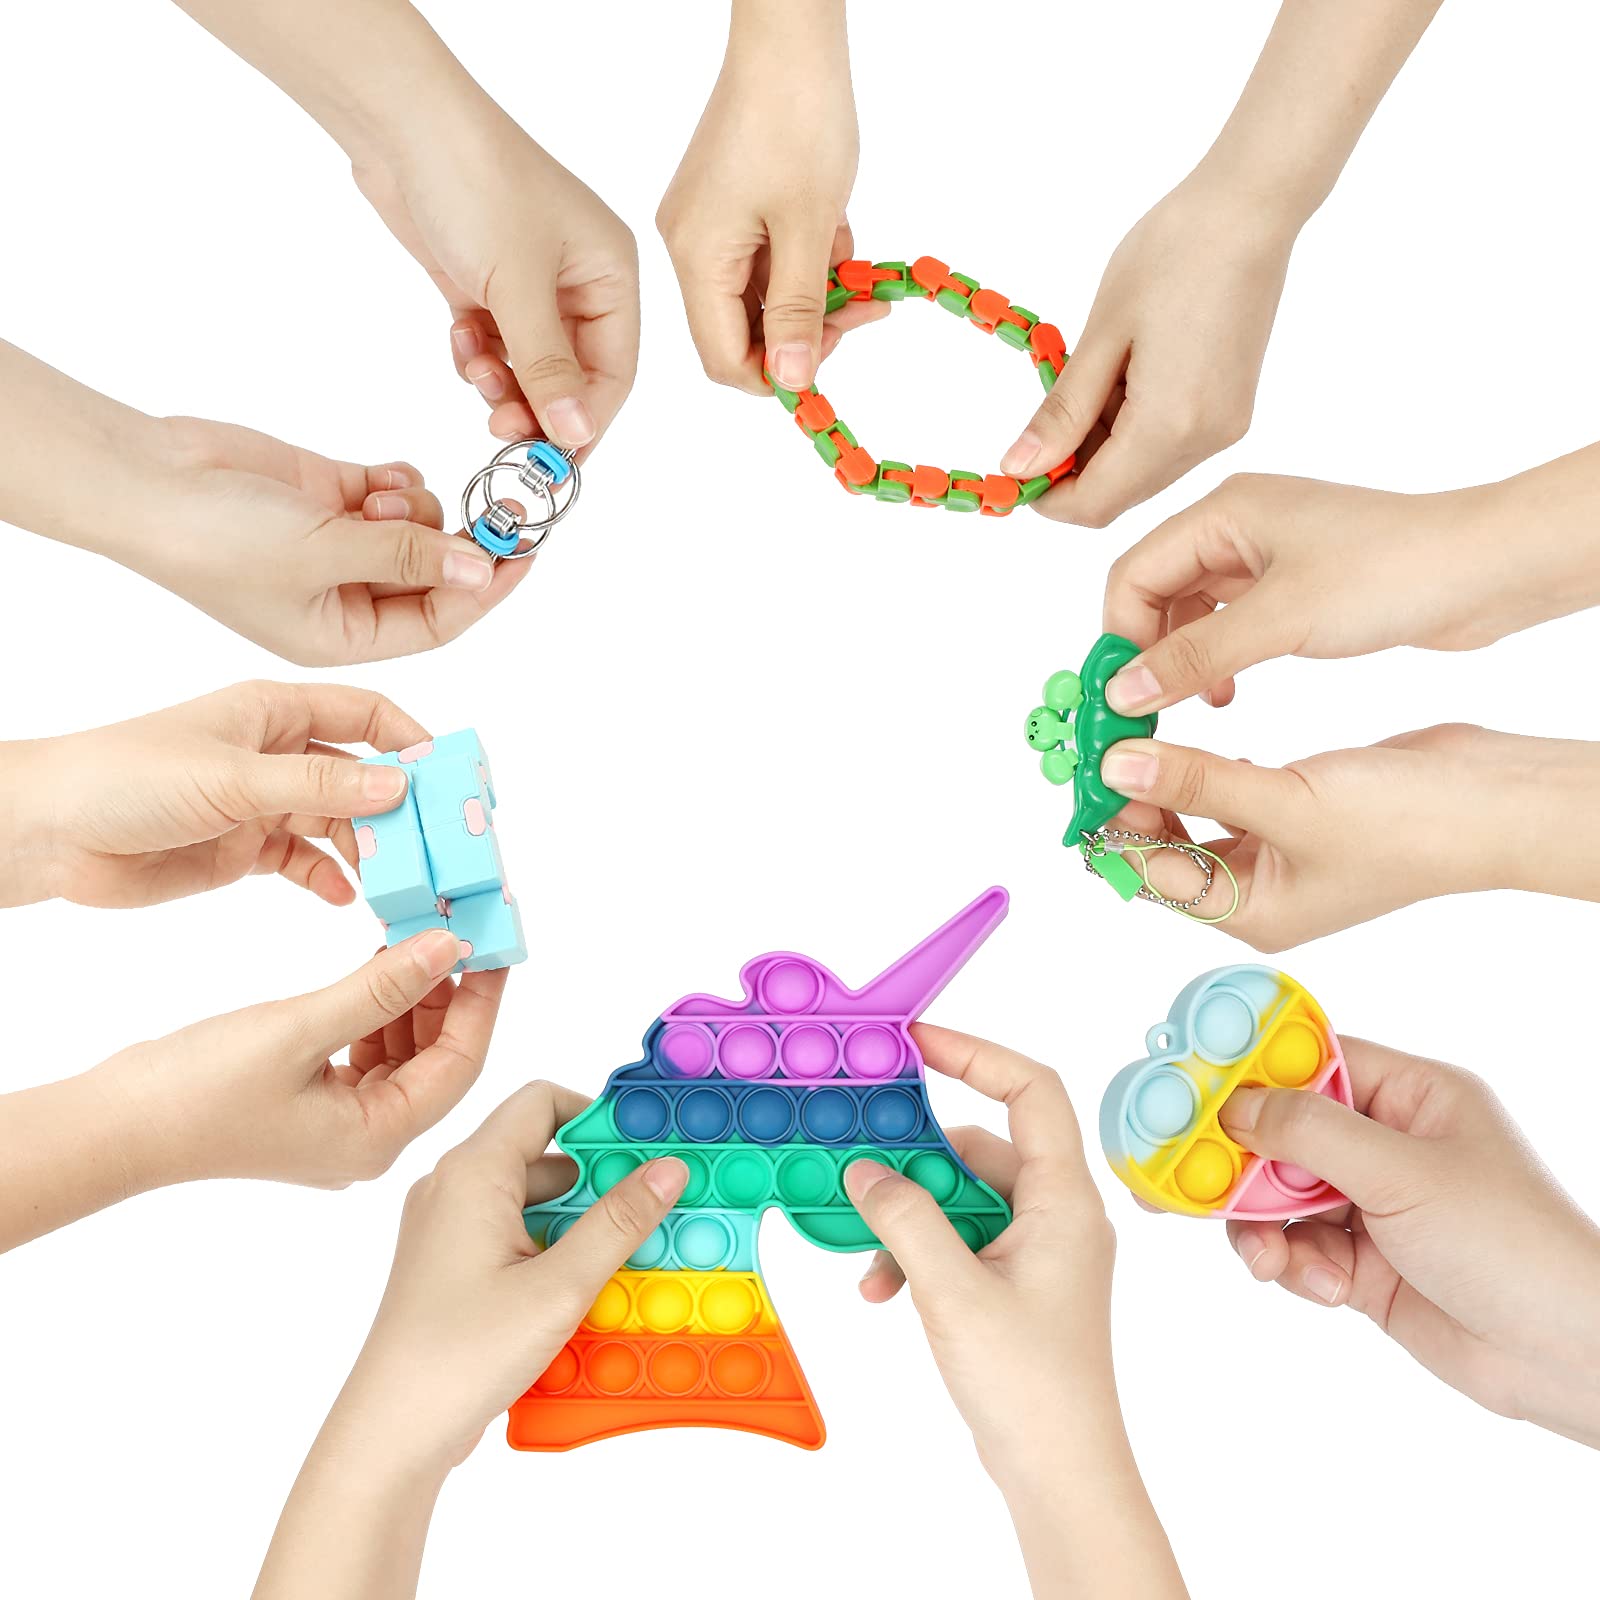 Fescuty Fidget Toys Pack Set Pop Fidgets Toy Sets Packs, Fidget Toys Pack Stress Relief and Anti-Anxiety Tools (23 Packs)